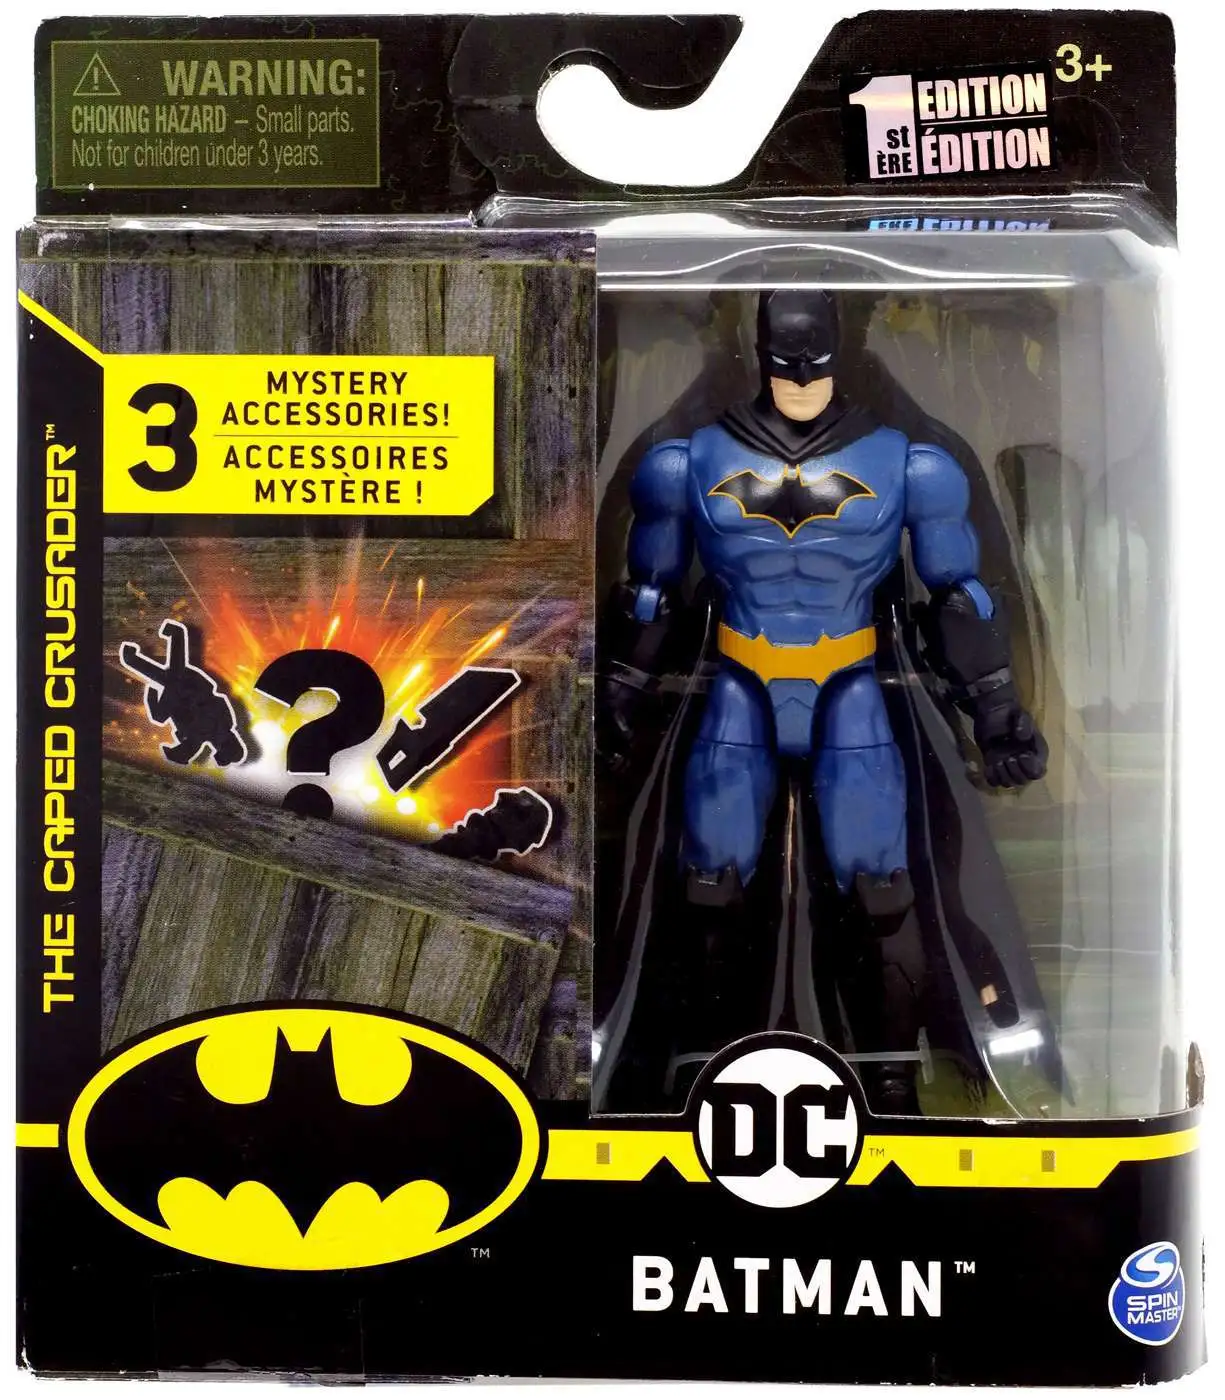 2020 DC Spin Master Target Man-bat 4in Figure The Caped Crusader for sale online 